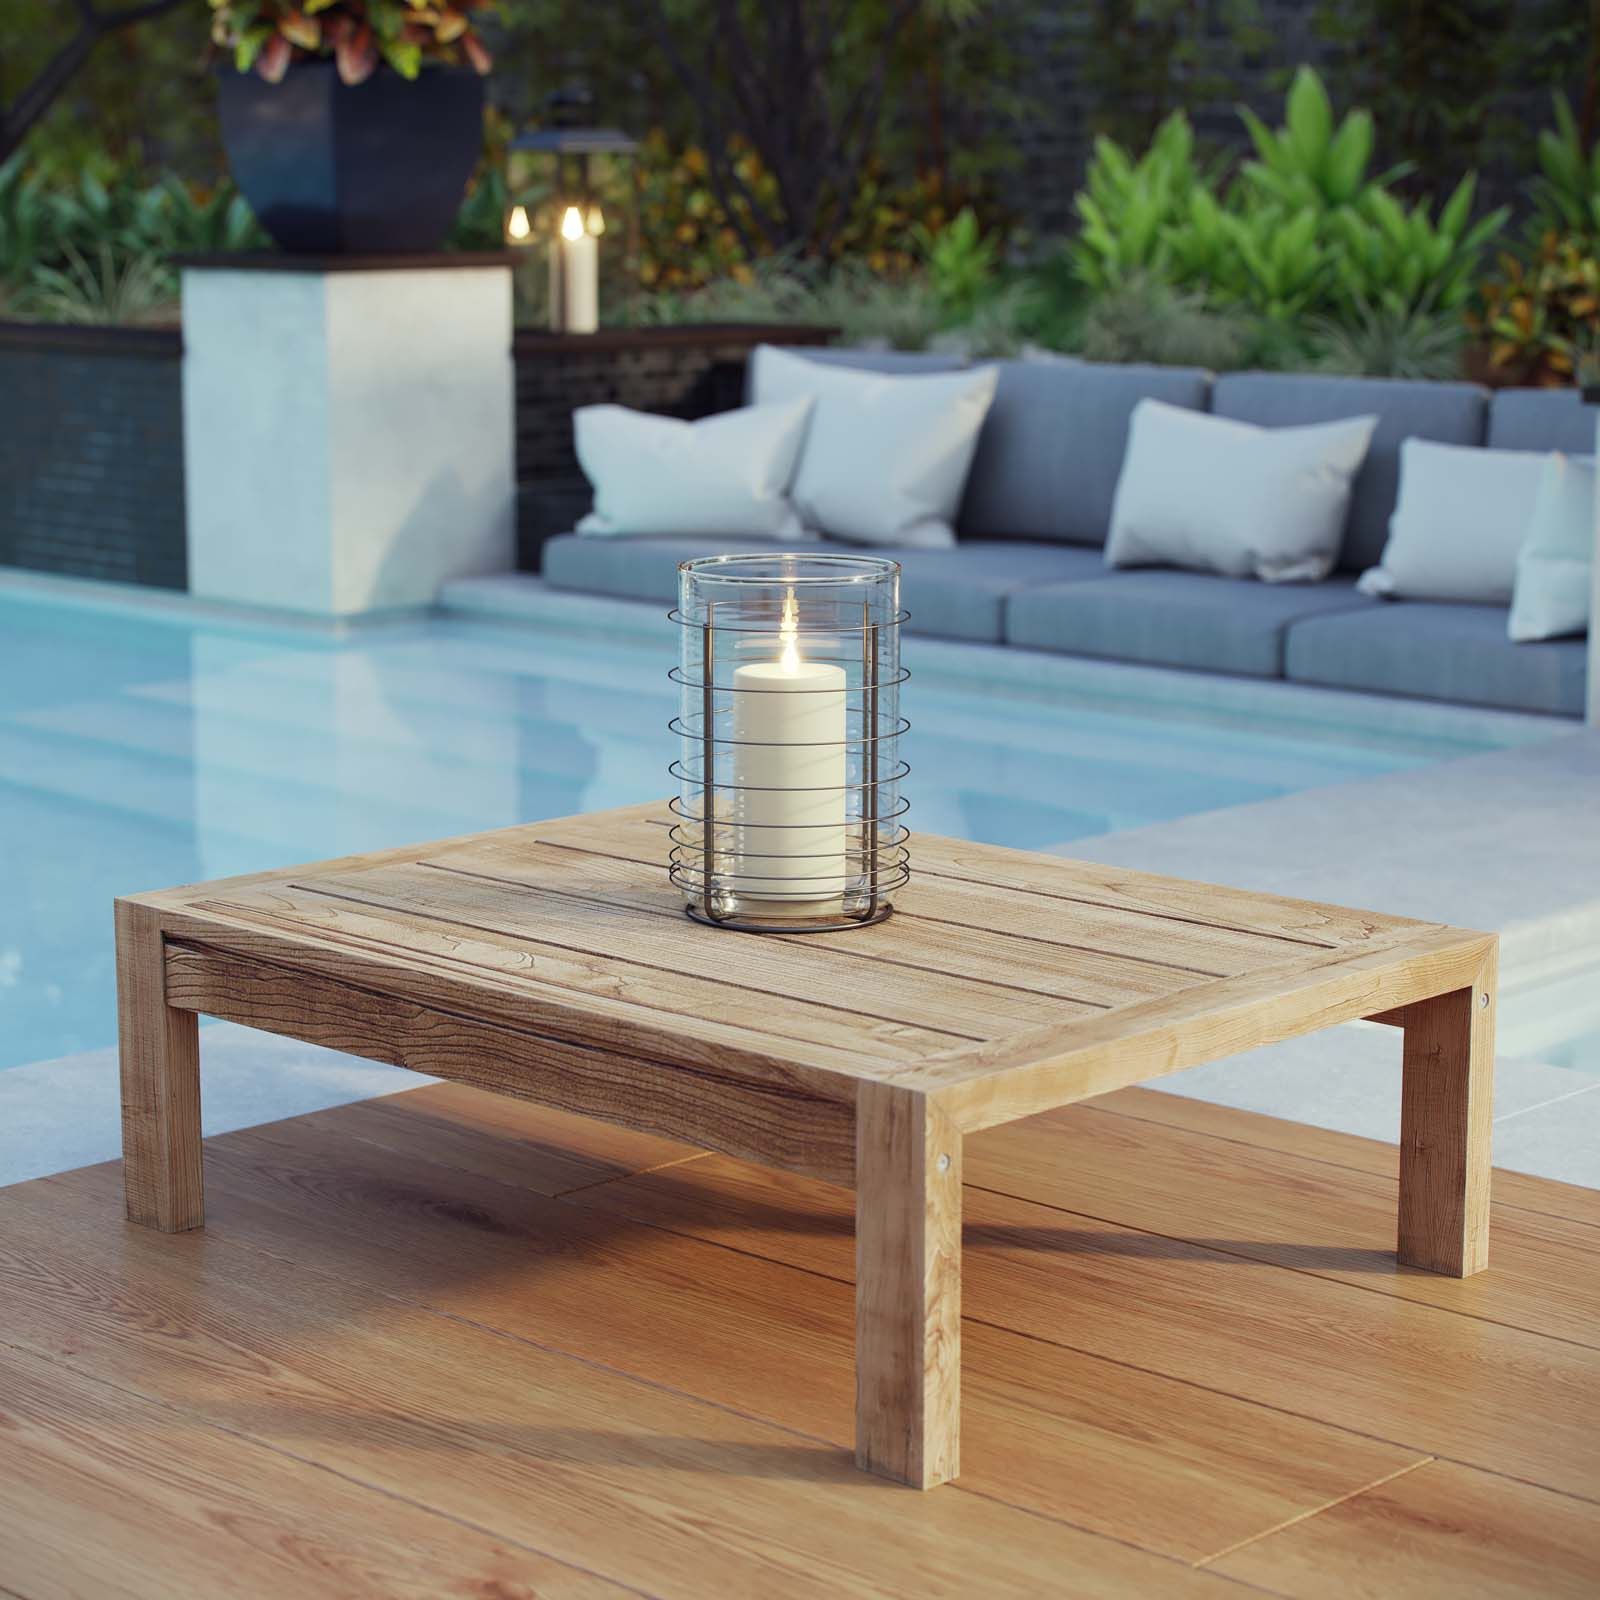 Upland Outdoor Patio Wood Coffee Table Natural Regarding Modern Outdoor Patio Coffee Tables (View 12 of 15)